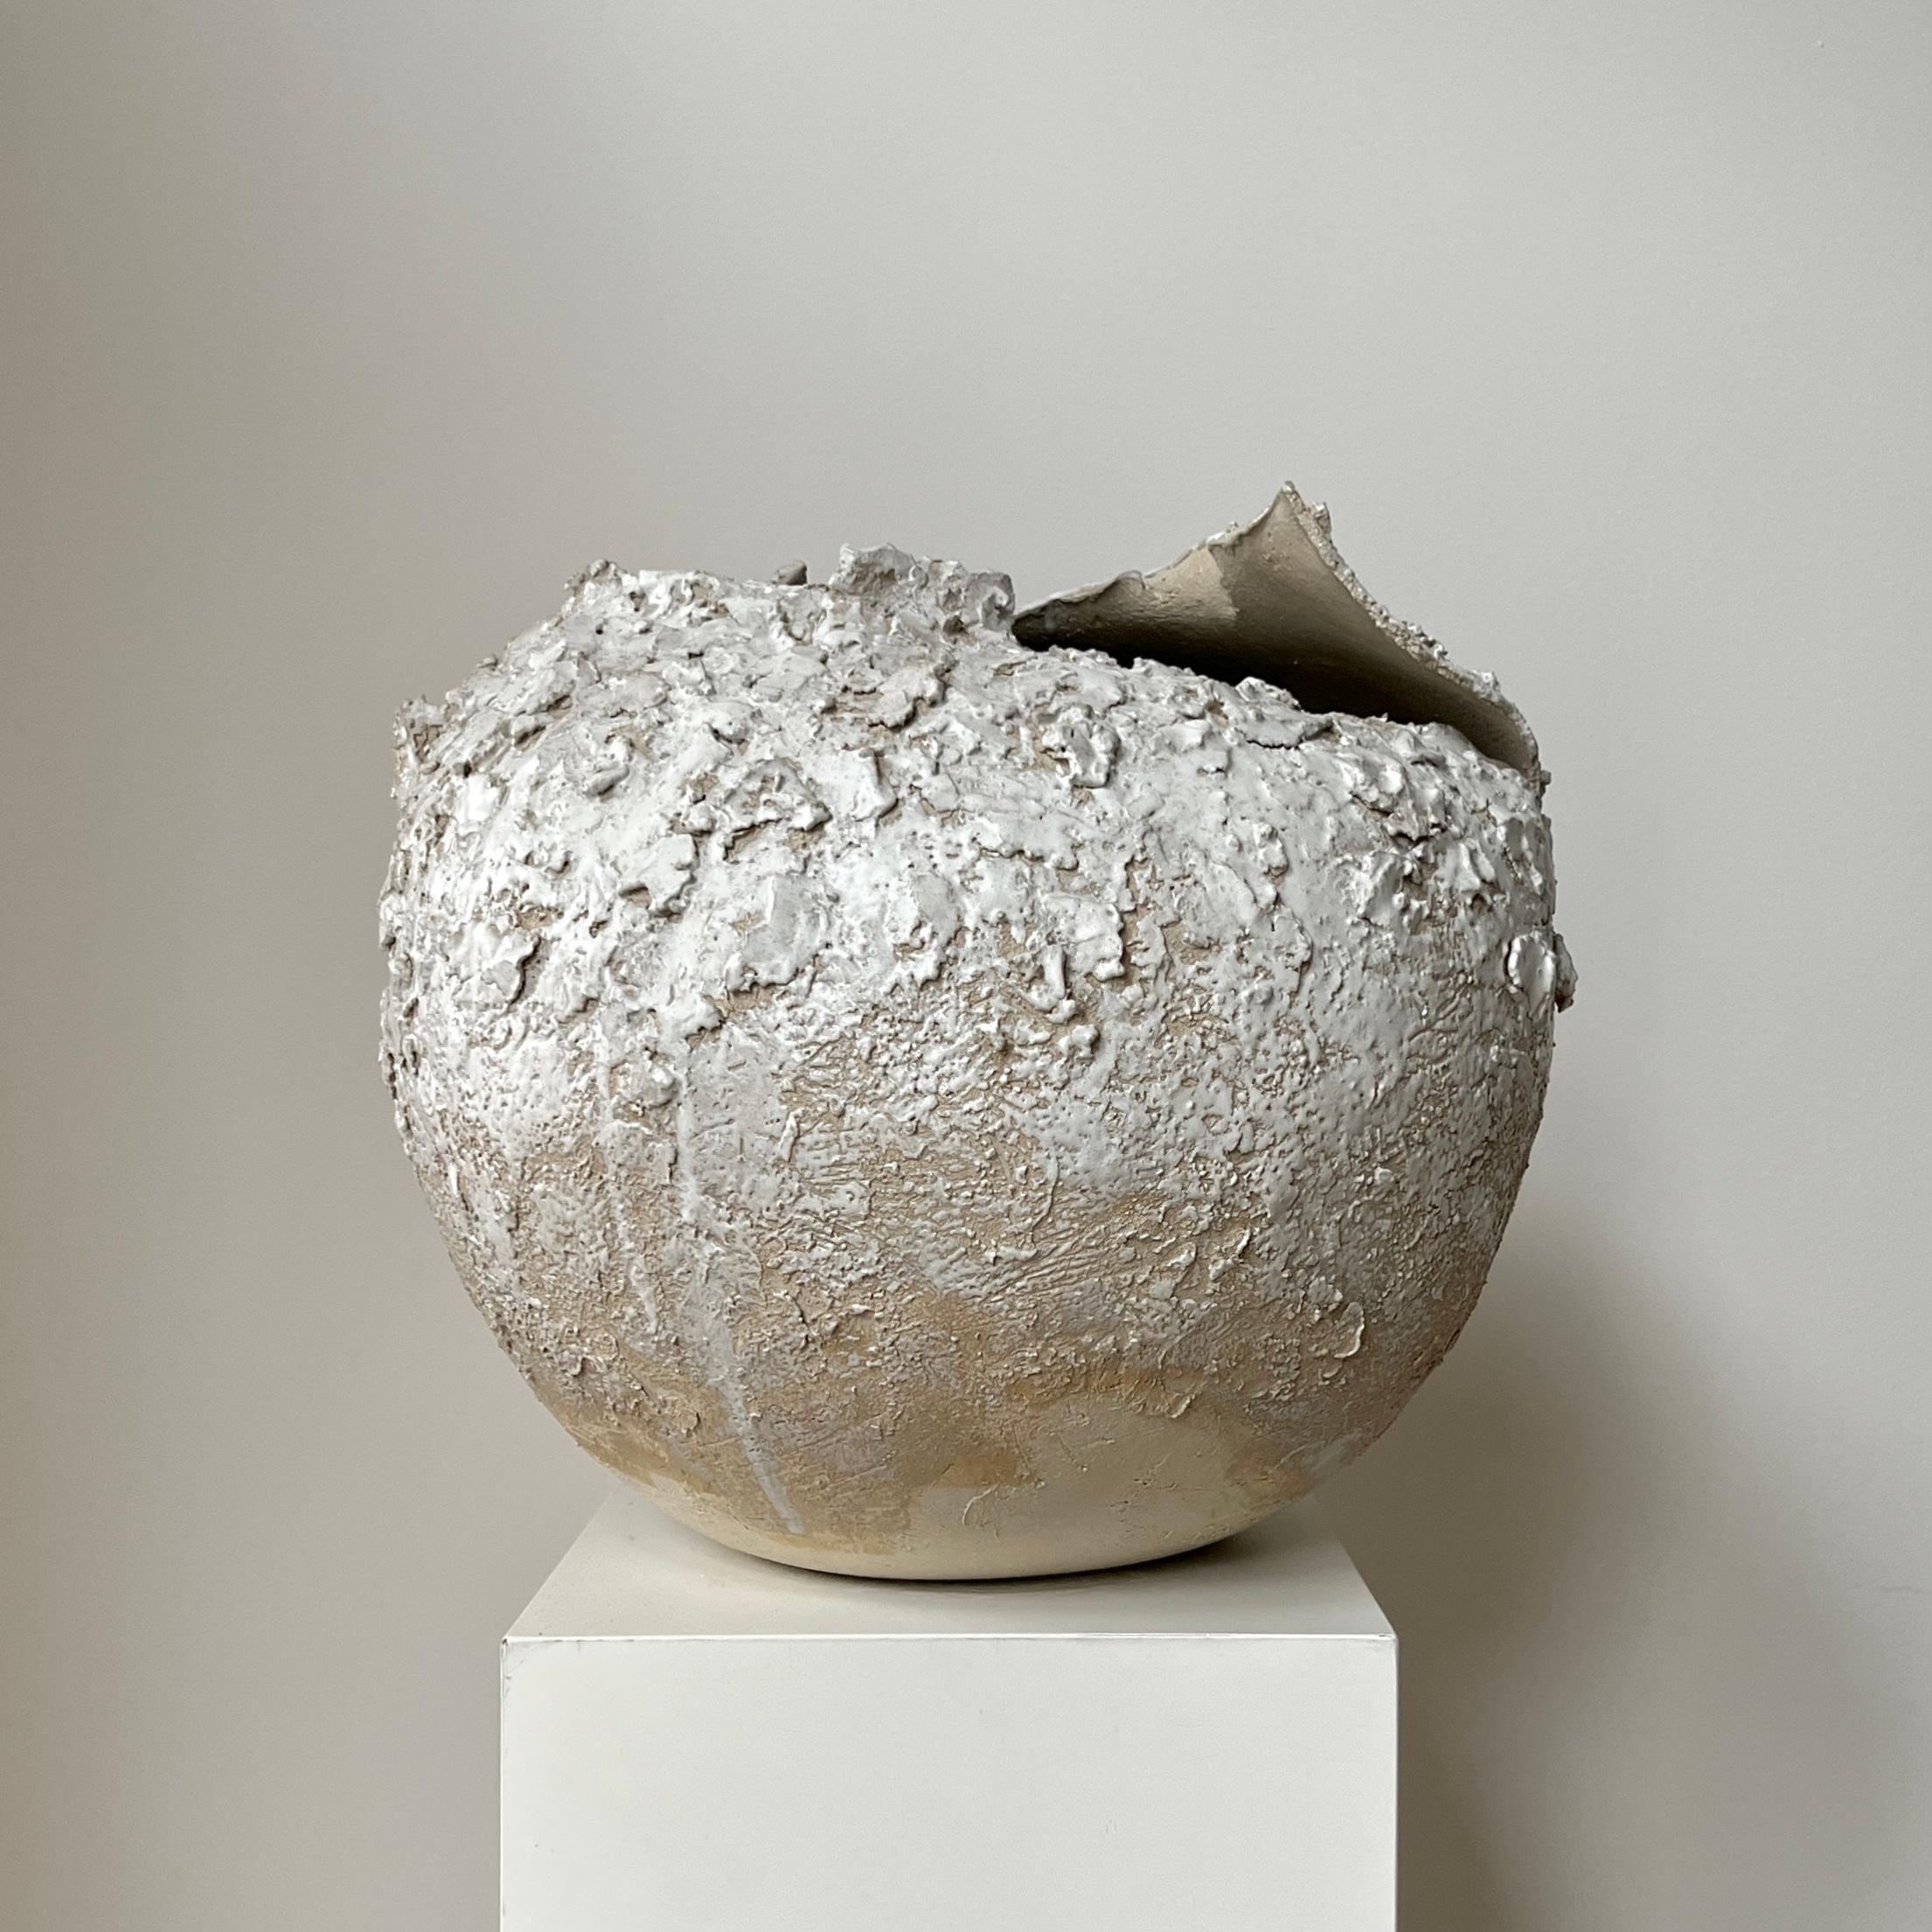 Untitled Stoneware Sculpture 11 by Laura Pasquino
One of a kind
Dimensions: D 25 cm x H 23 cm
Material: Glazed Stoneware
 
Laura Pasquino
Incorporating references from ancient Korean ceramics as well as principles of Japanese aesthetics of